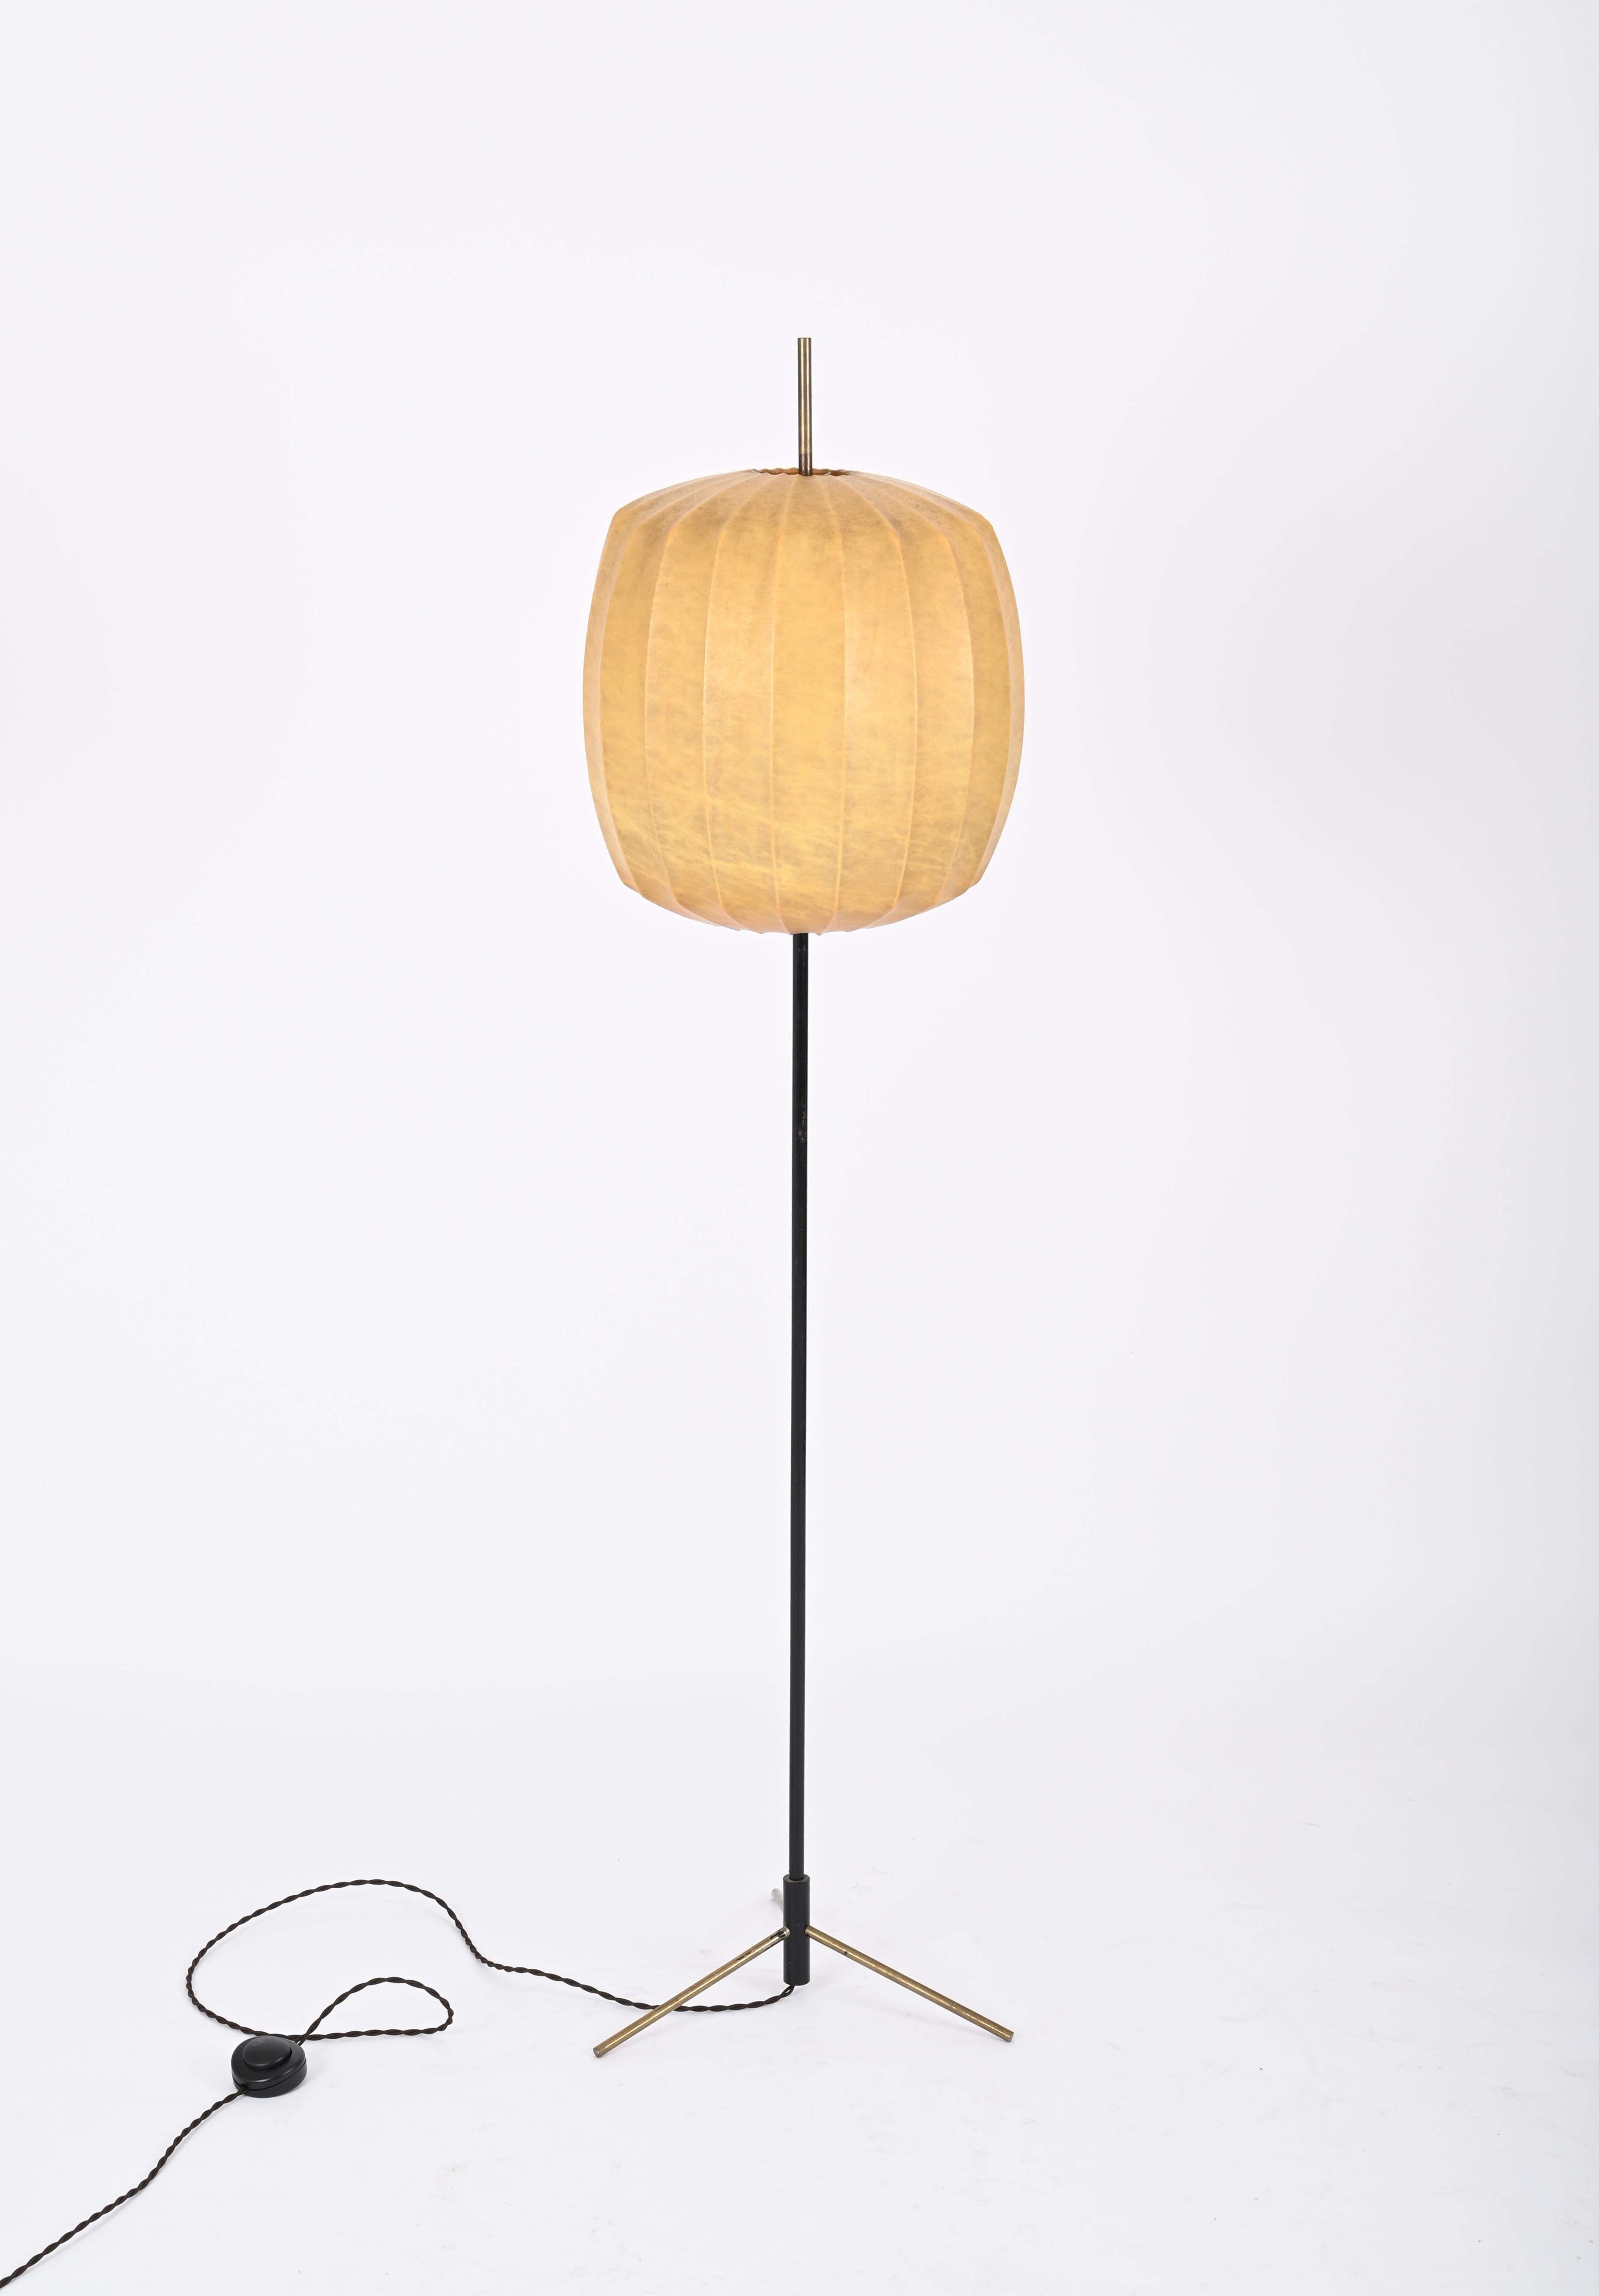 Midcentury Beige Cocoon Floor Lamp in Brass and Metal, Castiglioni, Italy 1960s For Sale 1